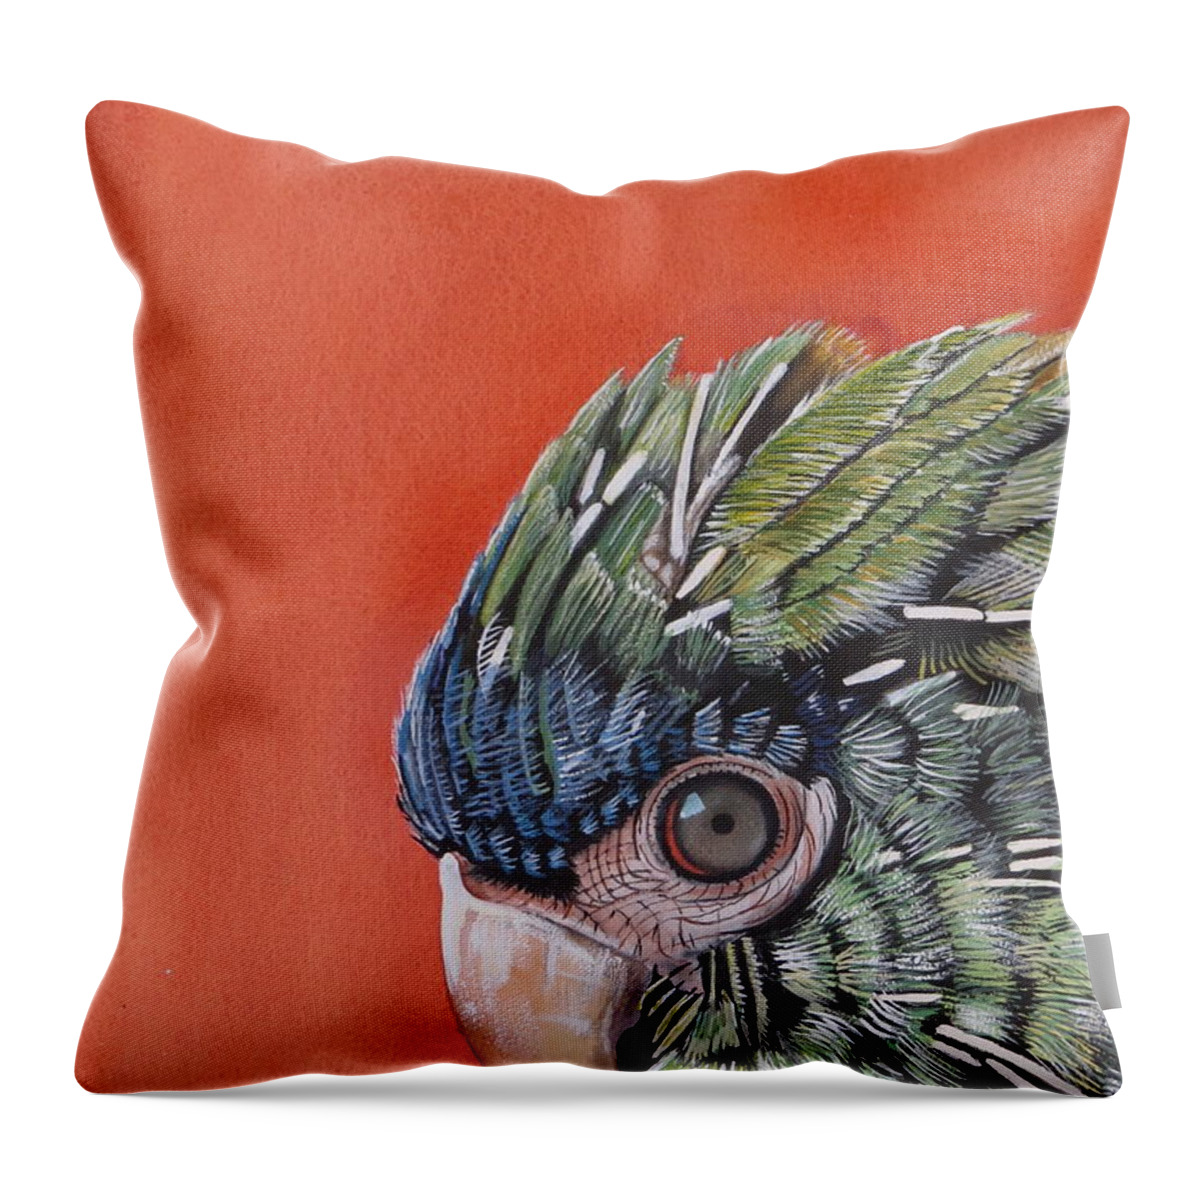 Orange Throw Pillow featuring the painting Jose Watercolor by Kimberly Walker